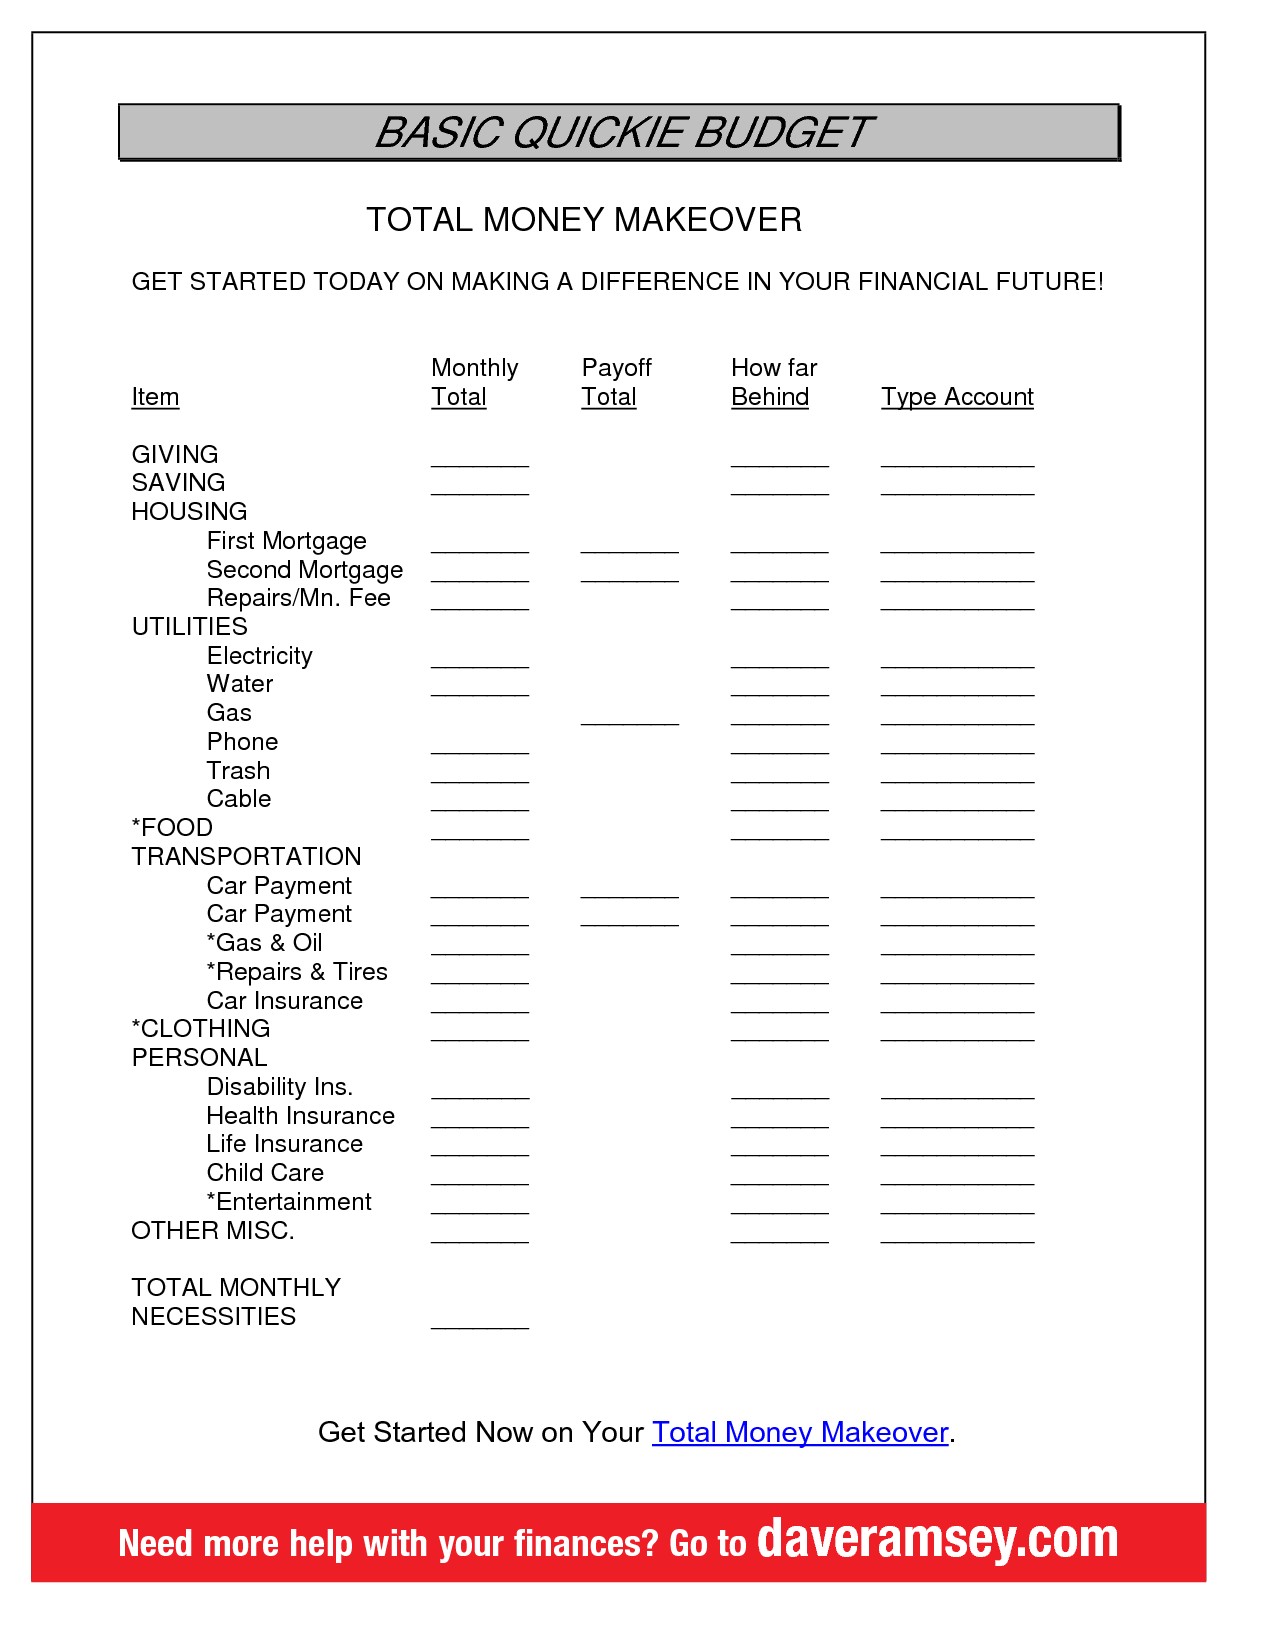 Dave Ramsey Budget Template BASIC QUICKIE BUDGET TOTAL Biblical Document Sheets Pdf